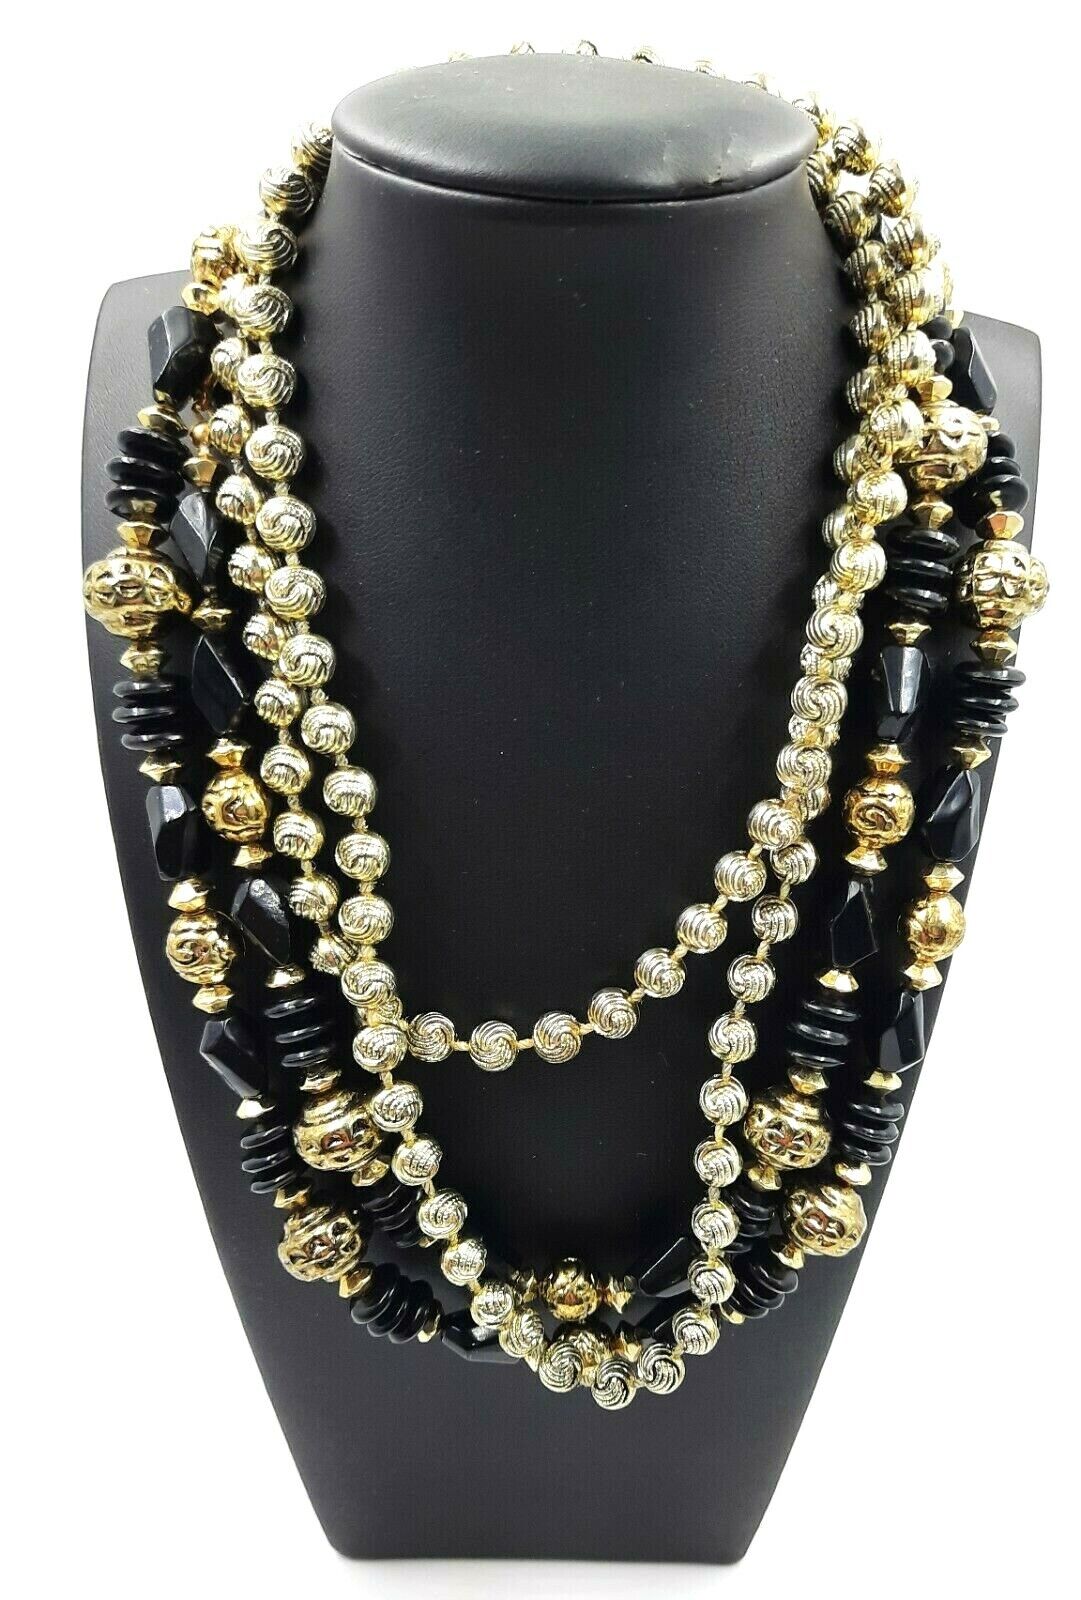 2 Black & Gold Beaded Vintage Necklaces Women's Fashion Costume Jewellery Unbranded Does Not Apply - фотография #5